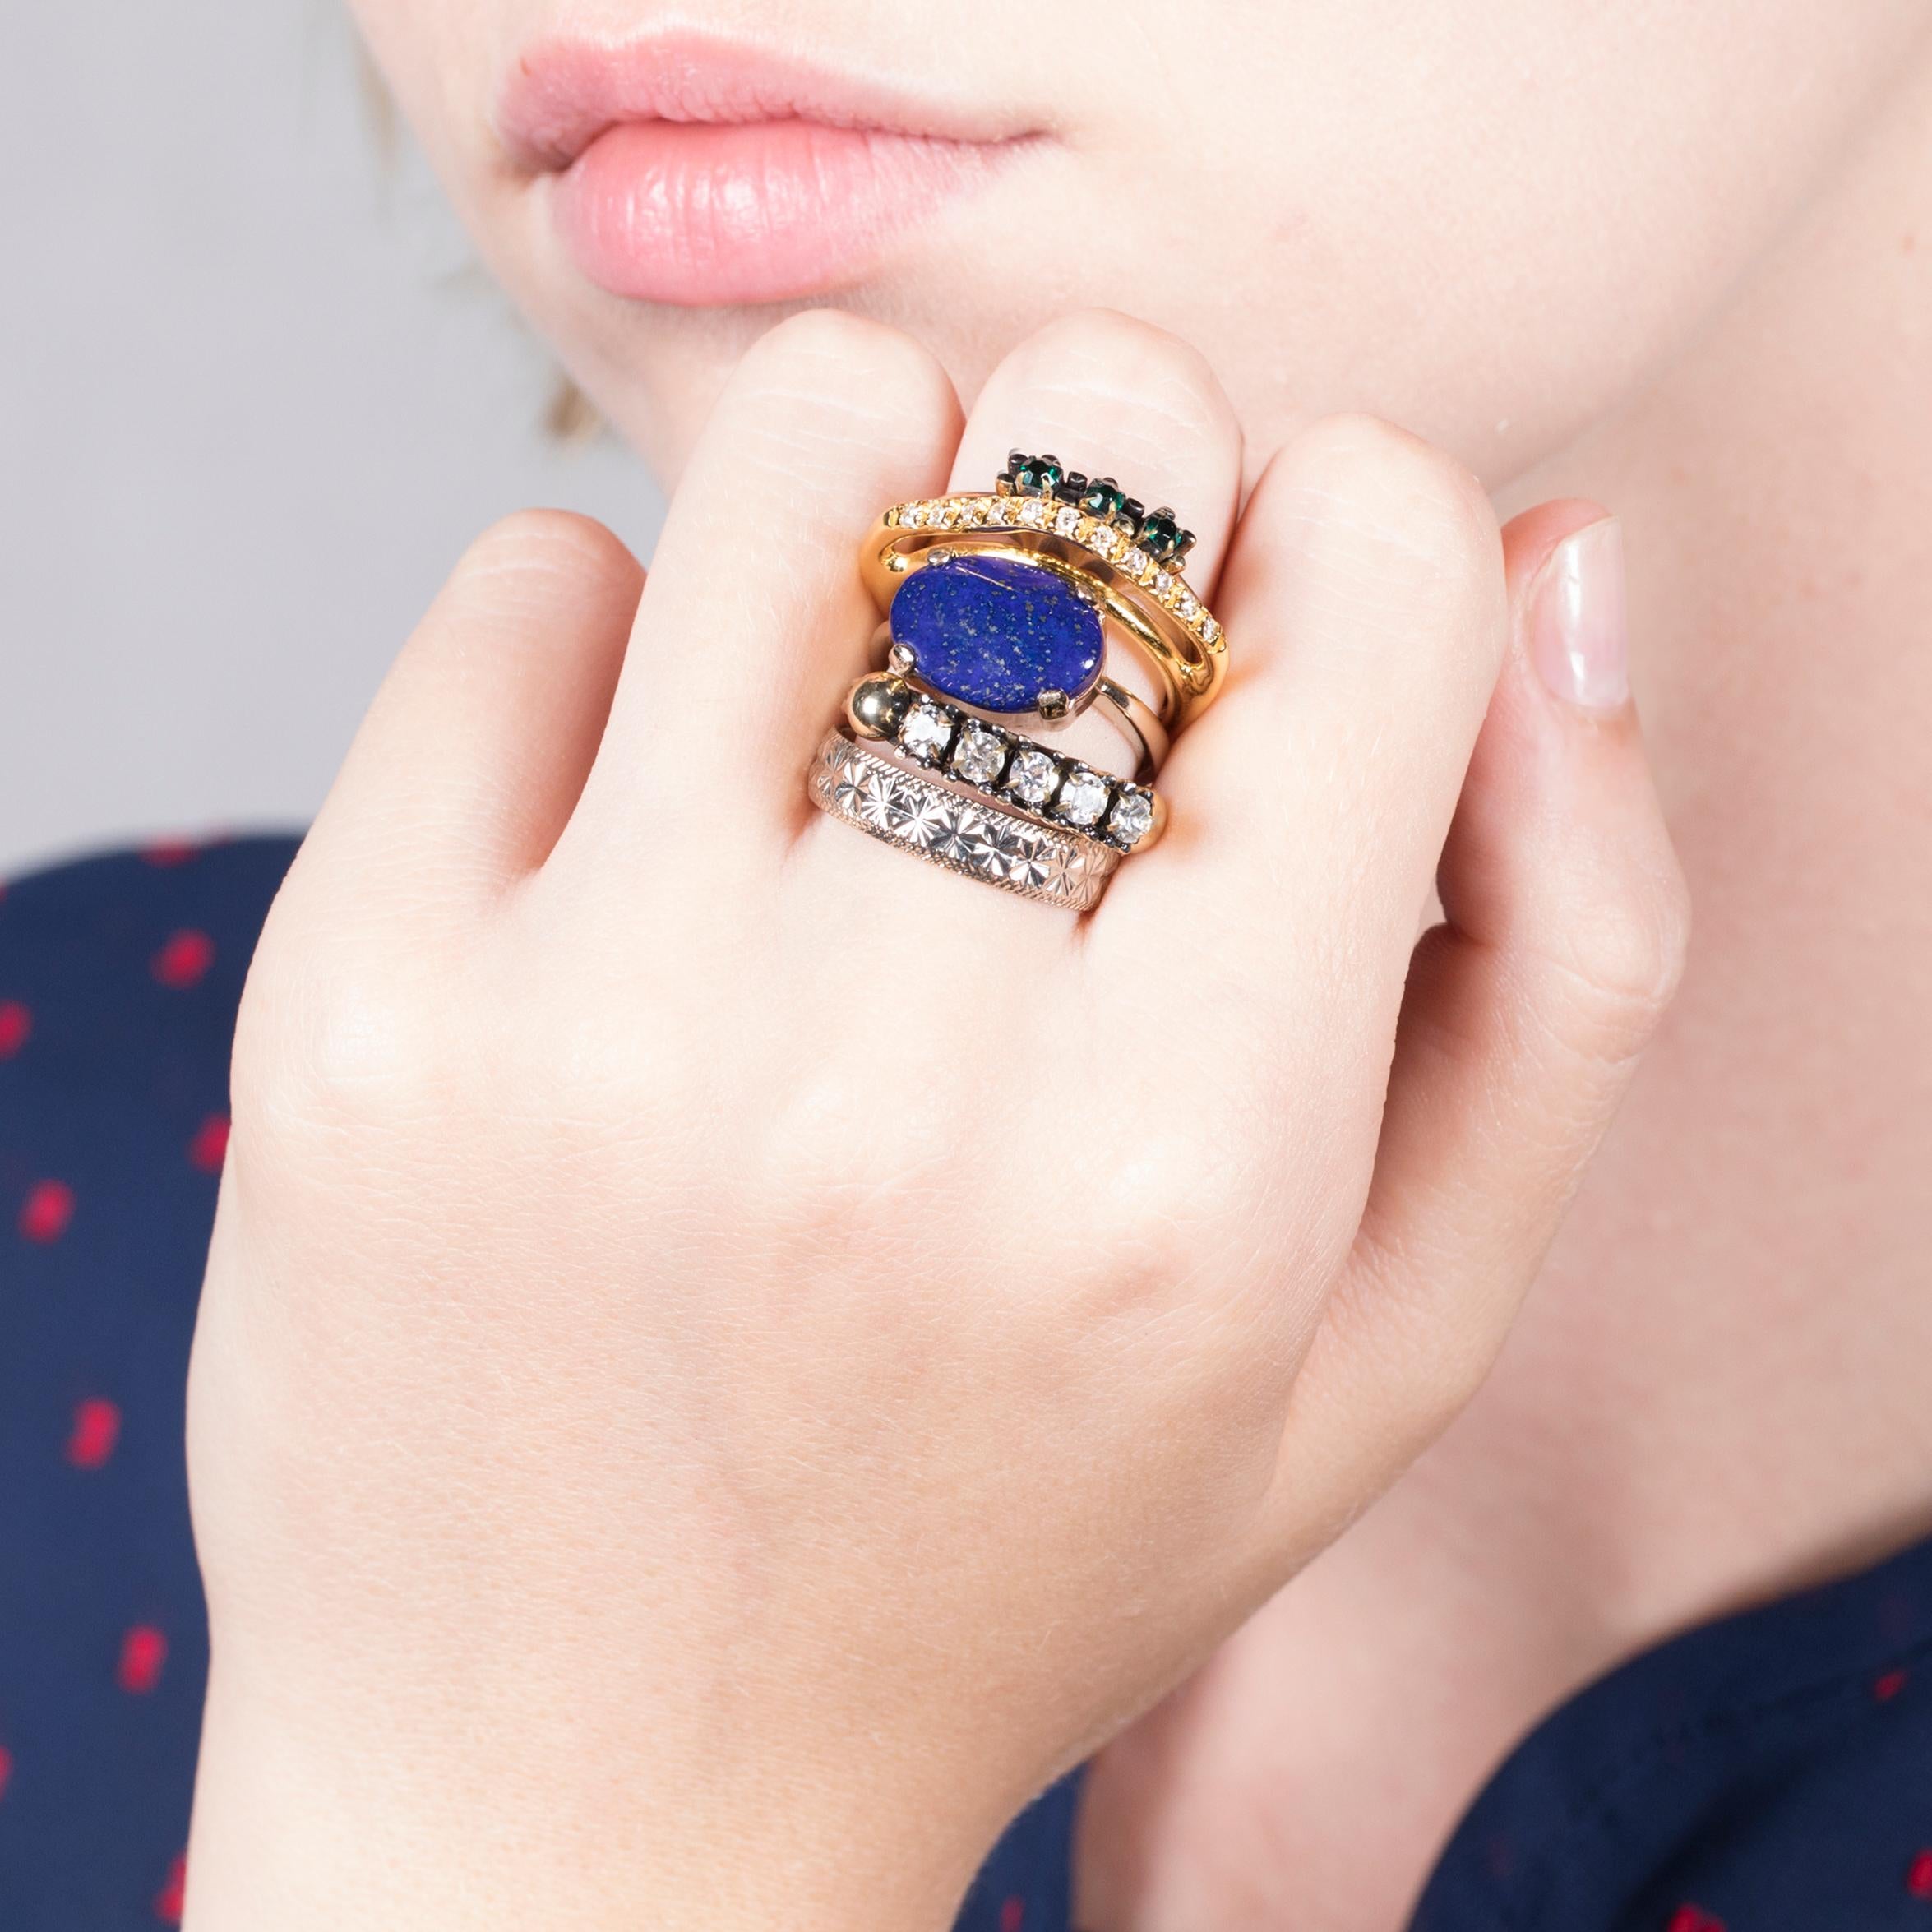 Enjoy Iosselliani’s love for mixing shapes and materials with this set of 5 mixed plating gold rings. This antique gold tone set of 5 rings is accented by a lapis lazuli oval stone casted into a delicate vintage set. Green and crystal zircons will